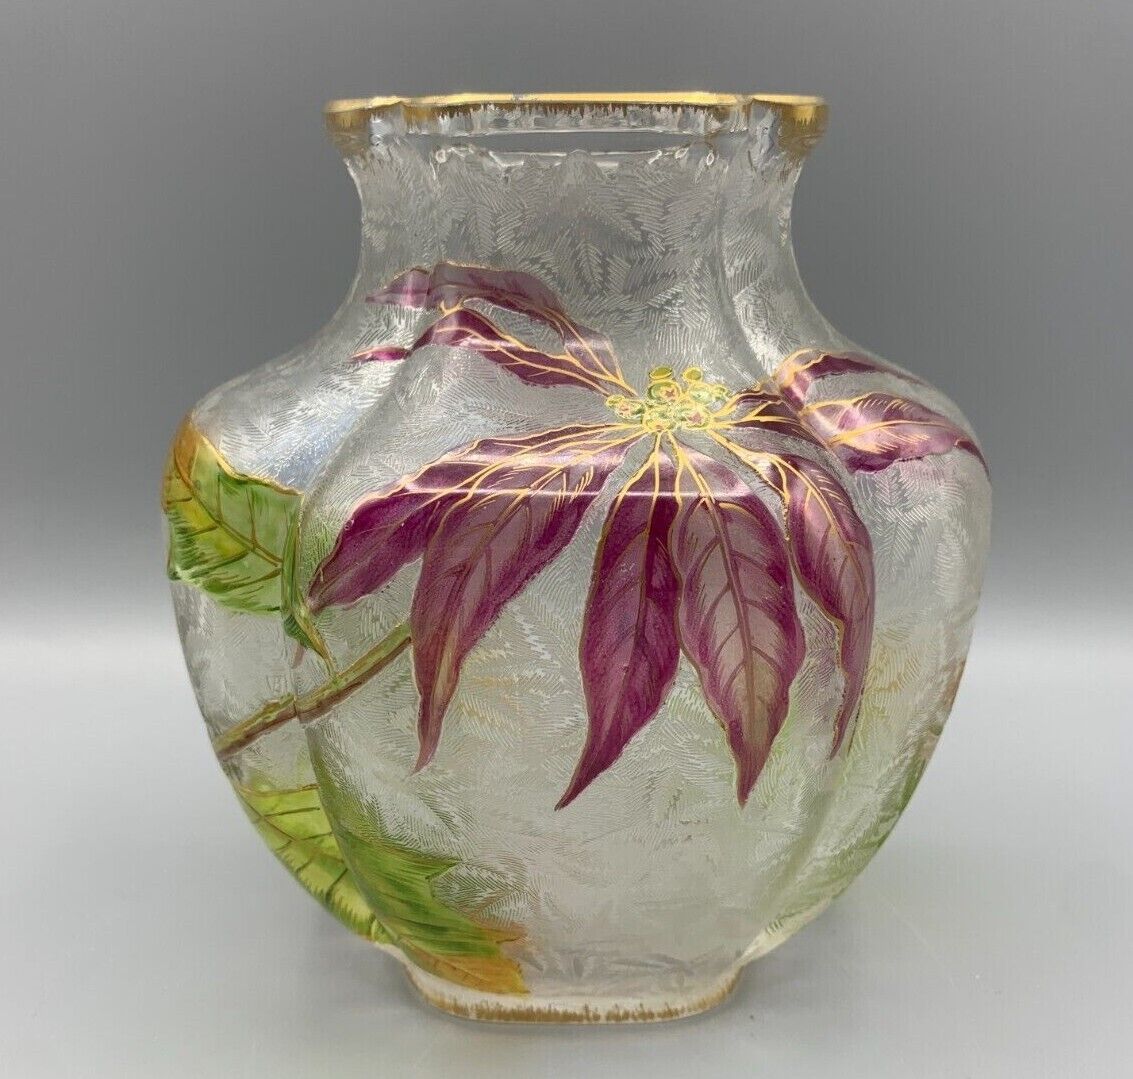 BACCARAT CRYSTAL GLASS VASE CAMEO LOBED ENAMELED POINSETTIA FRENCH ART NOUVEAU